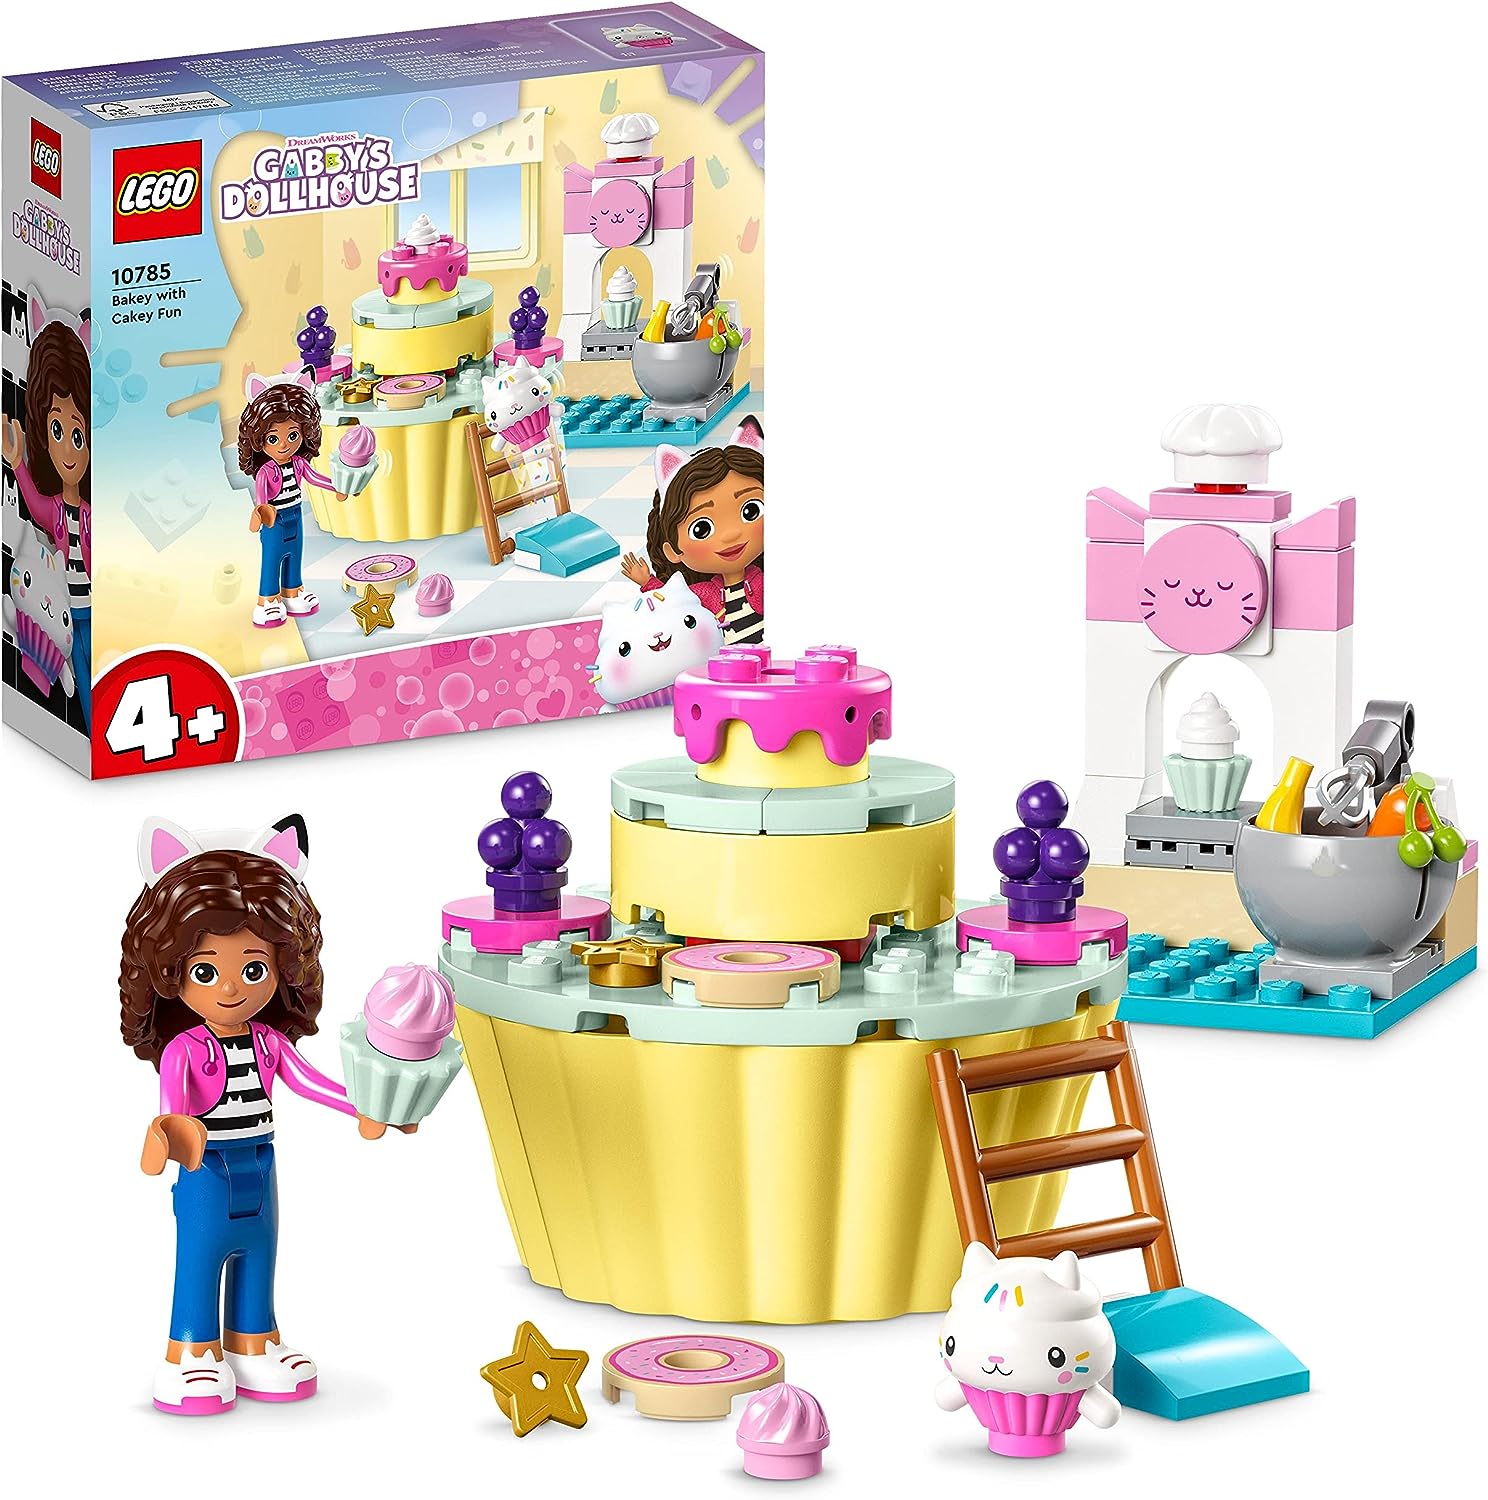 LEGO 10785 Gabby\'s Dollhouse Kuchis Bakery Set with Gabby and Kuchi Figures, Dollhouse Kitchen Playset with Cupcake, Toy for Girls and Boys from 4 Years, Birthday Gift Idea